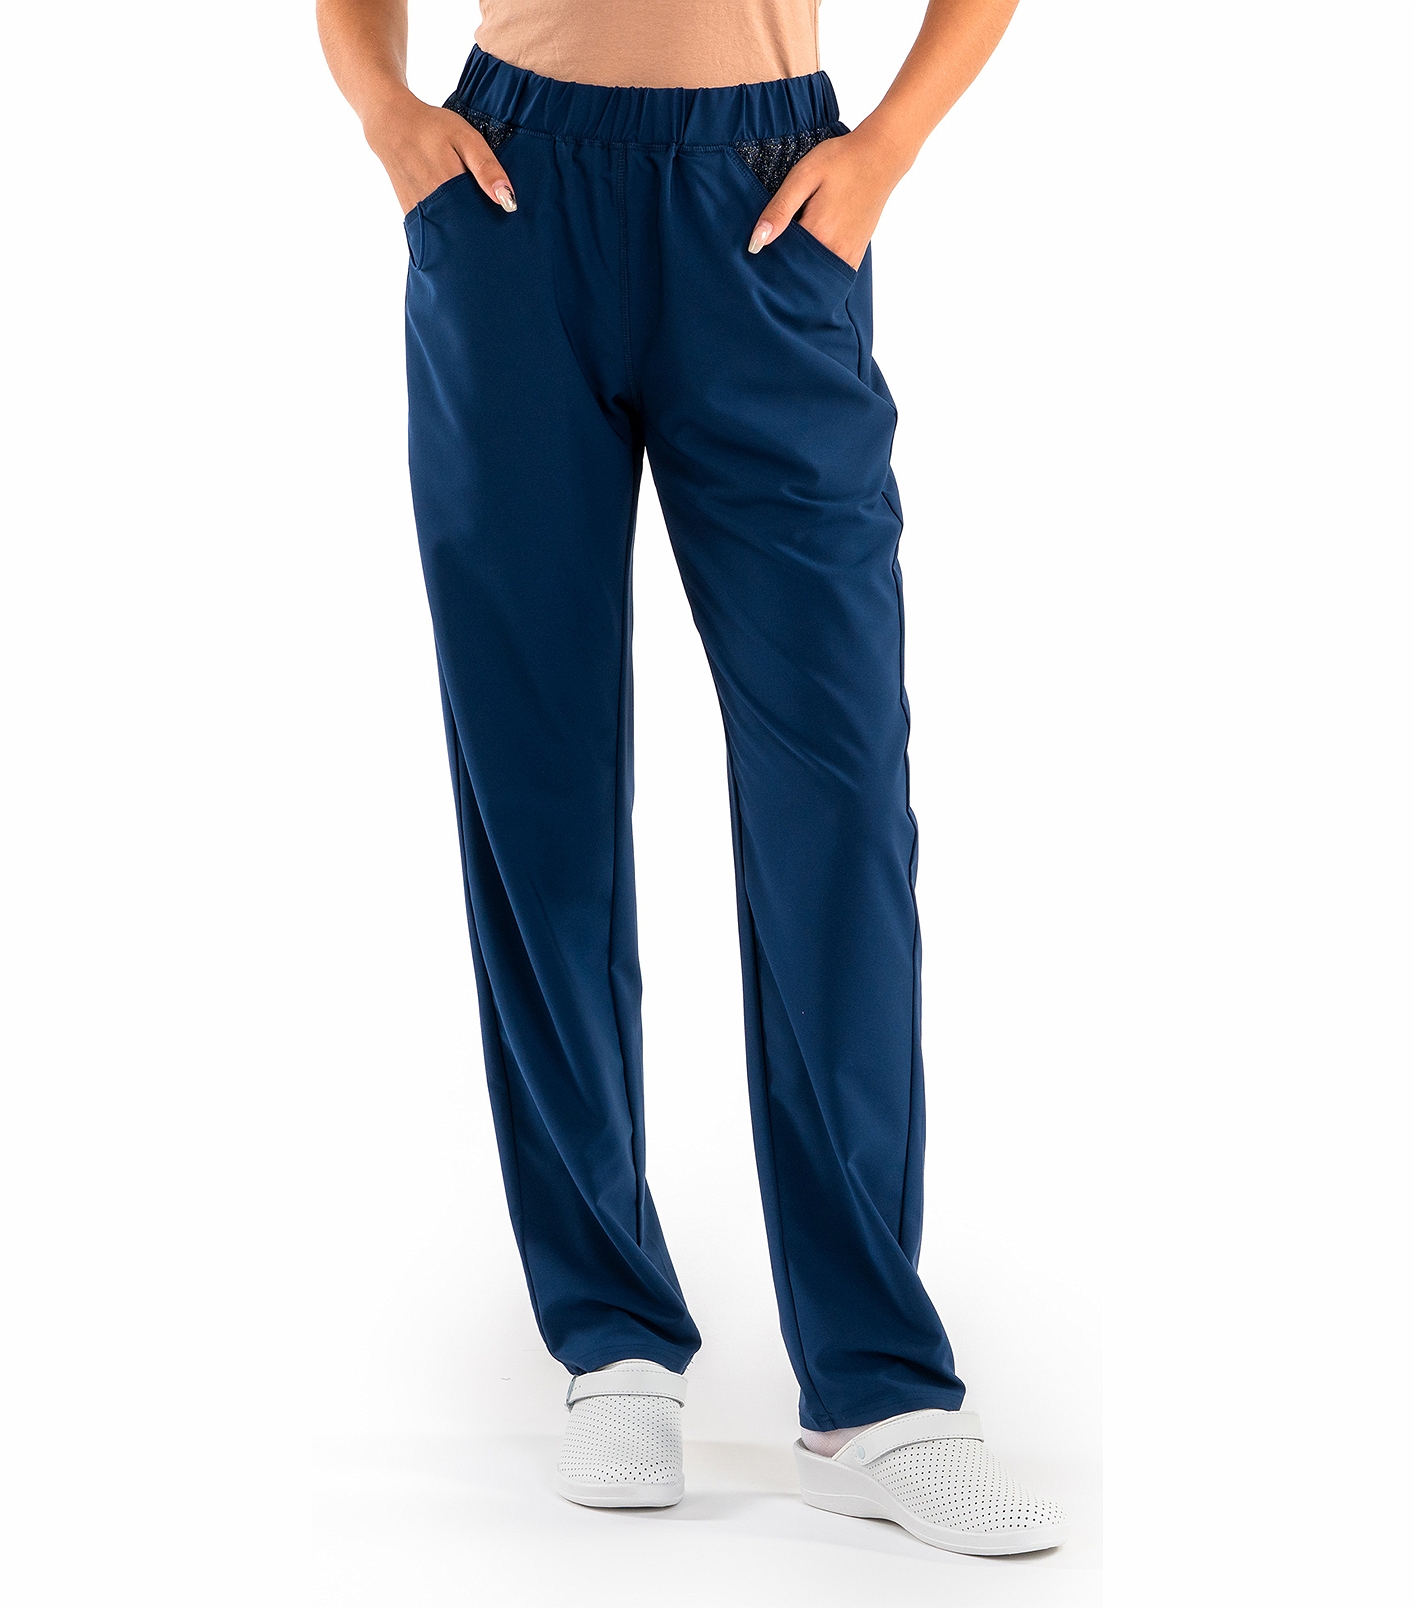 Worked In Women's Fashion Scrub Pants With Stylish Shimmer SD304B ...